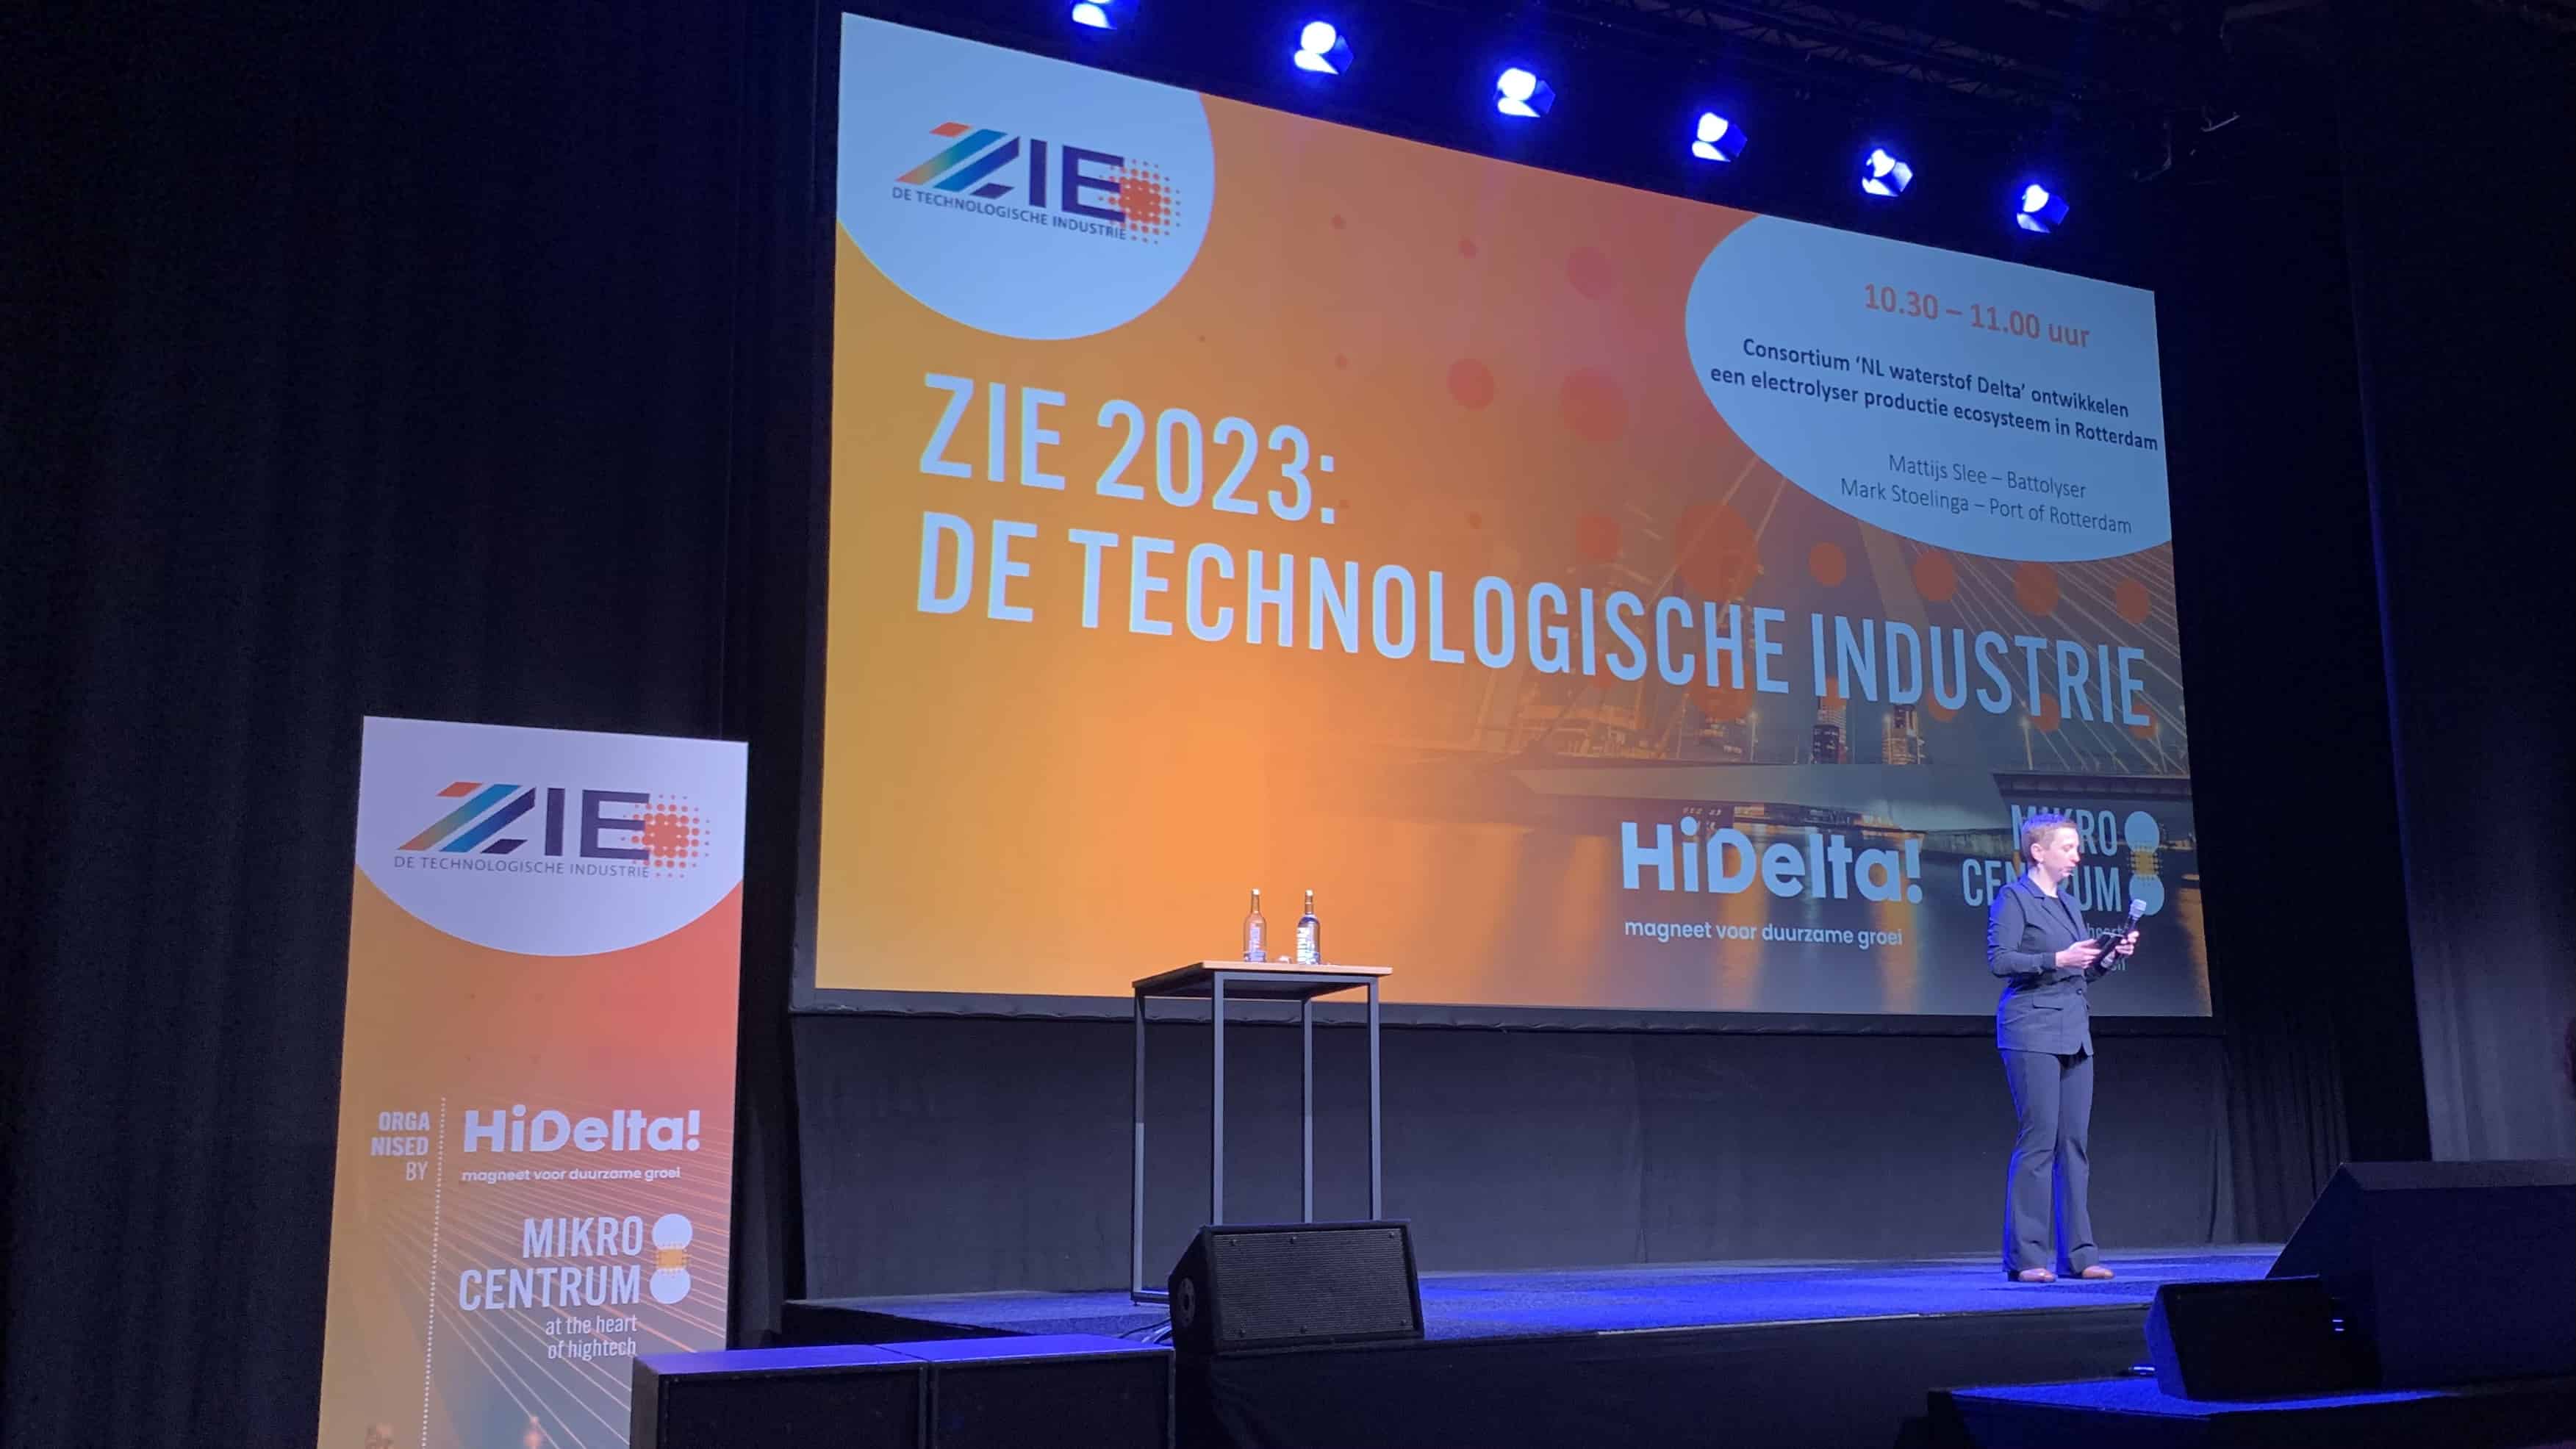 ZIE 2023 focuses on knowledge sharing to tackle today's big issues in high tech